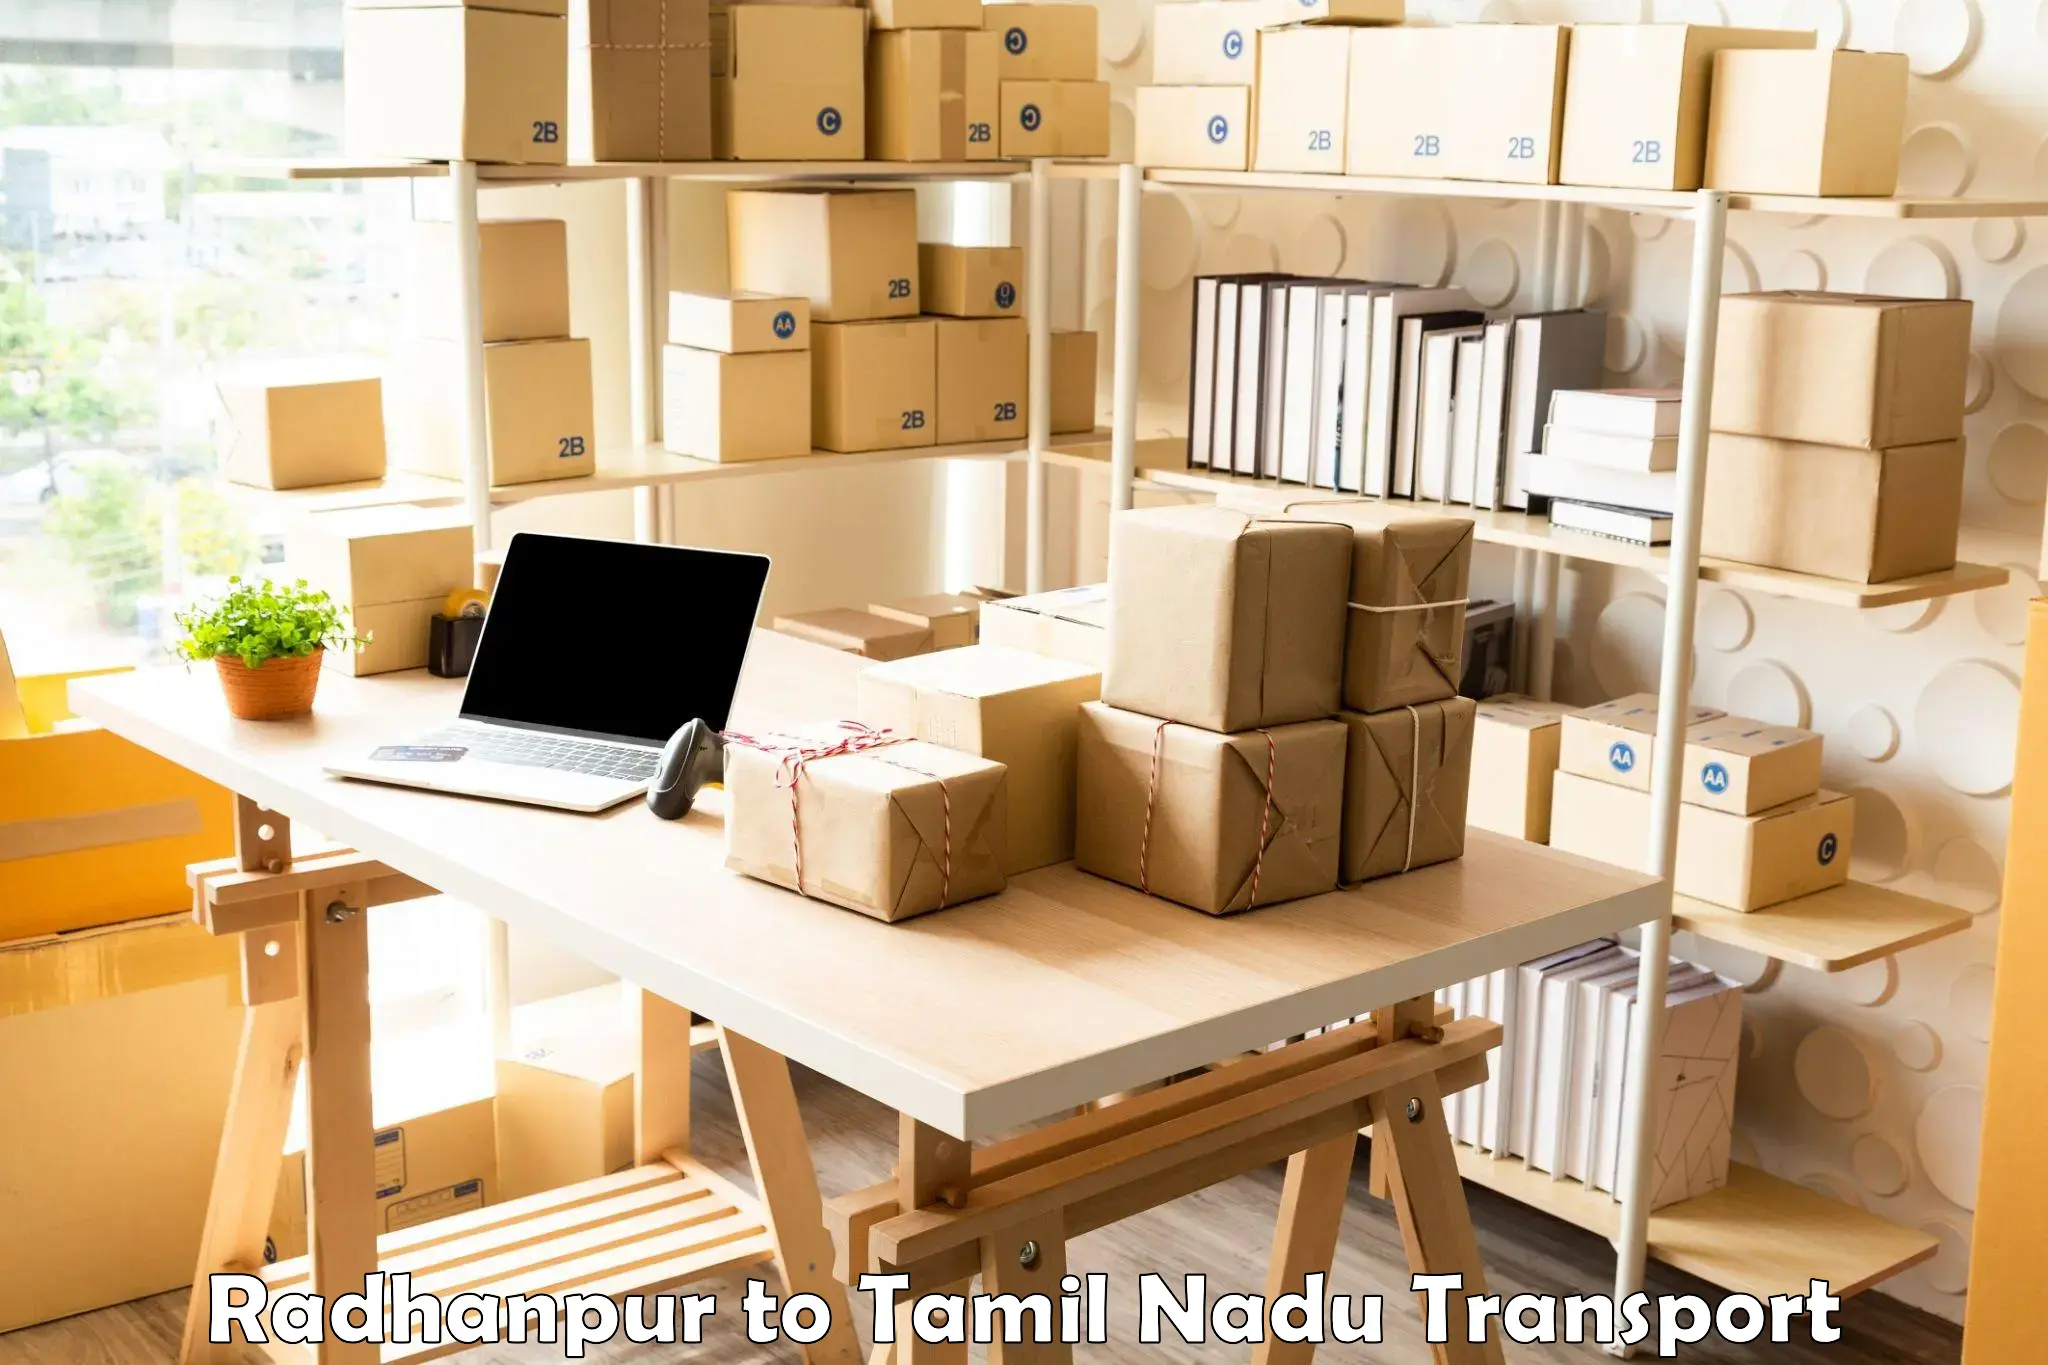 Express transport services in Radhanpur to Chennai